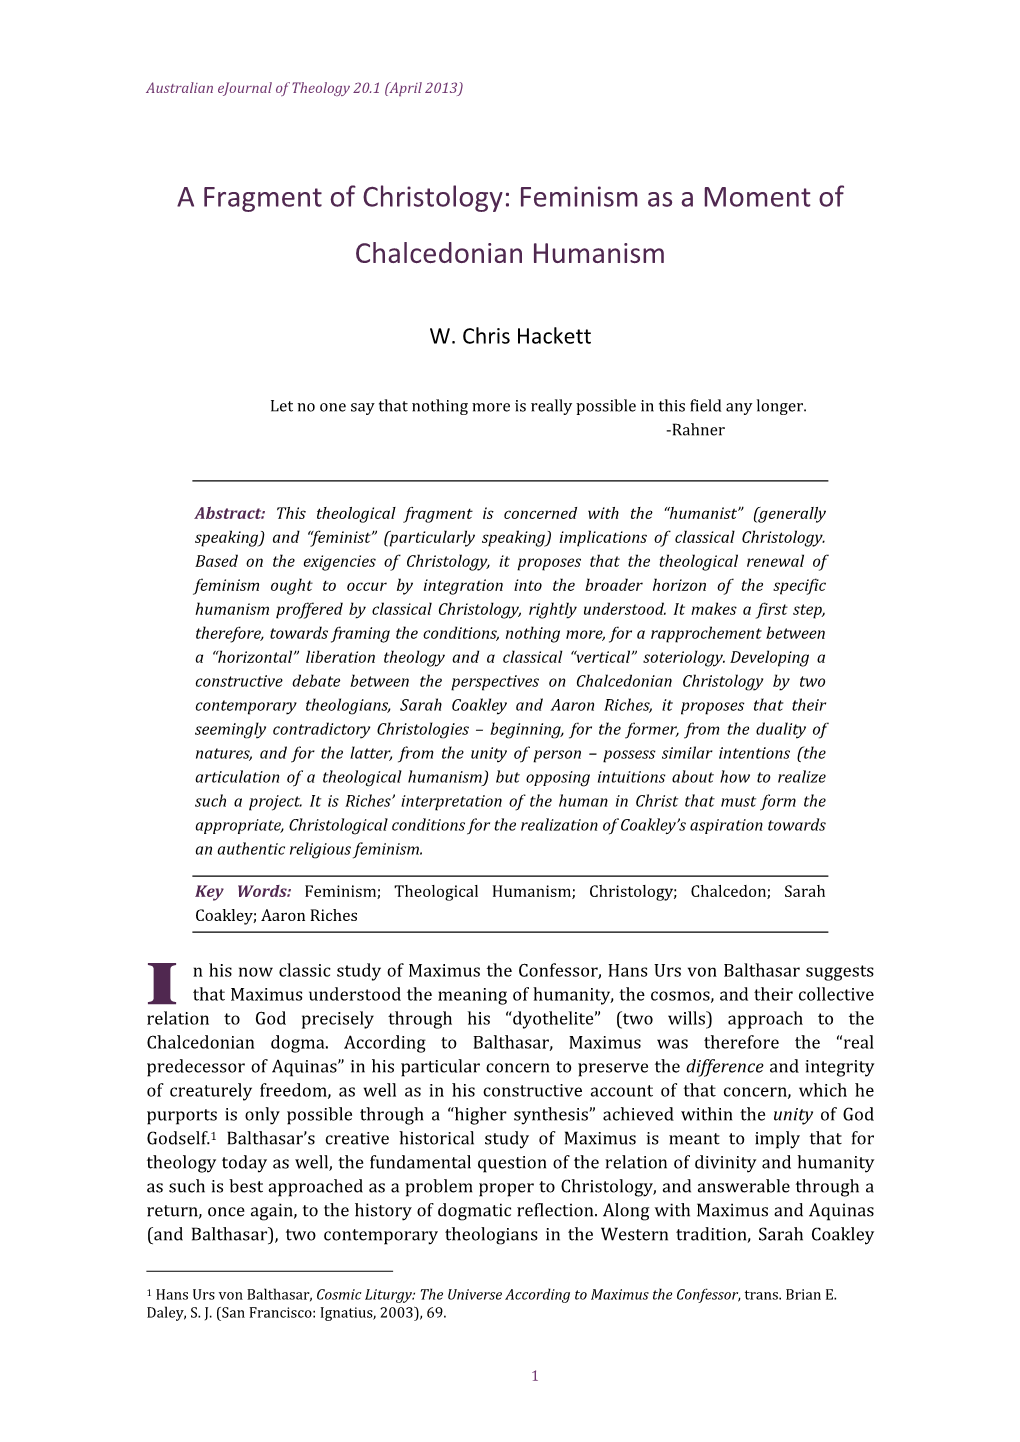 A Fragment of Christology: Feminism As a Moment of Chalcedonian Humanism